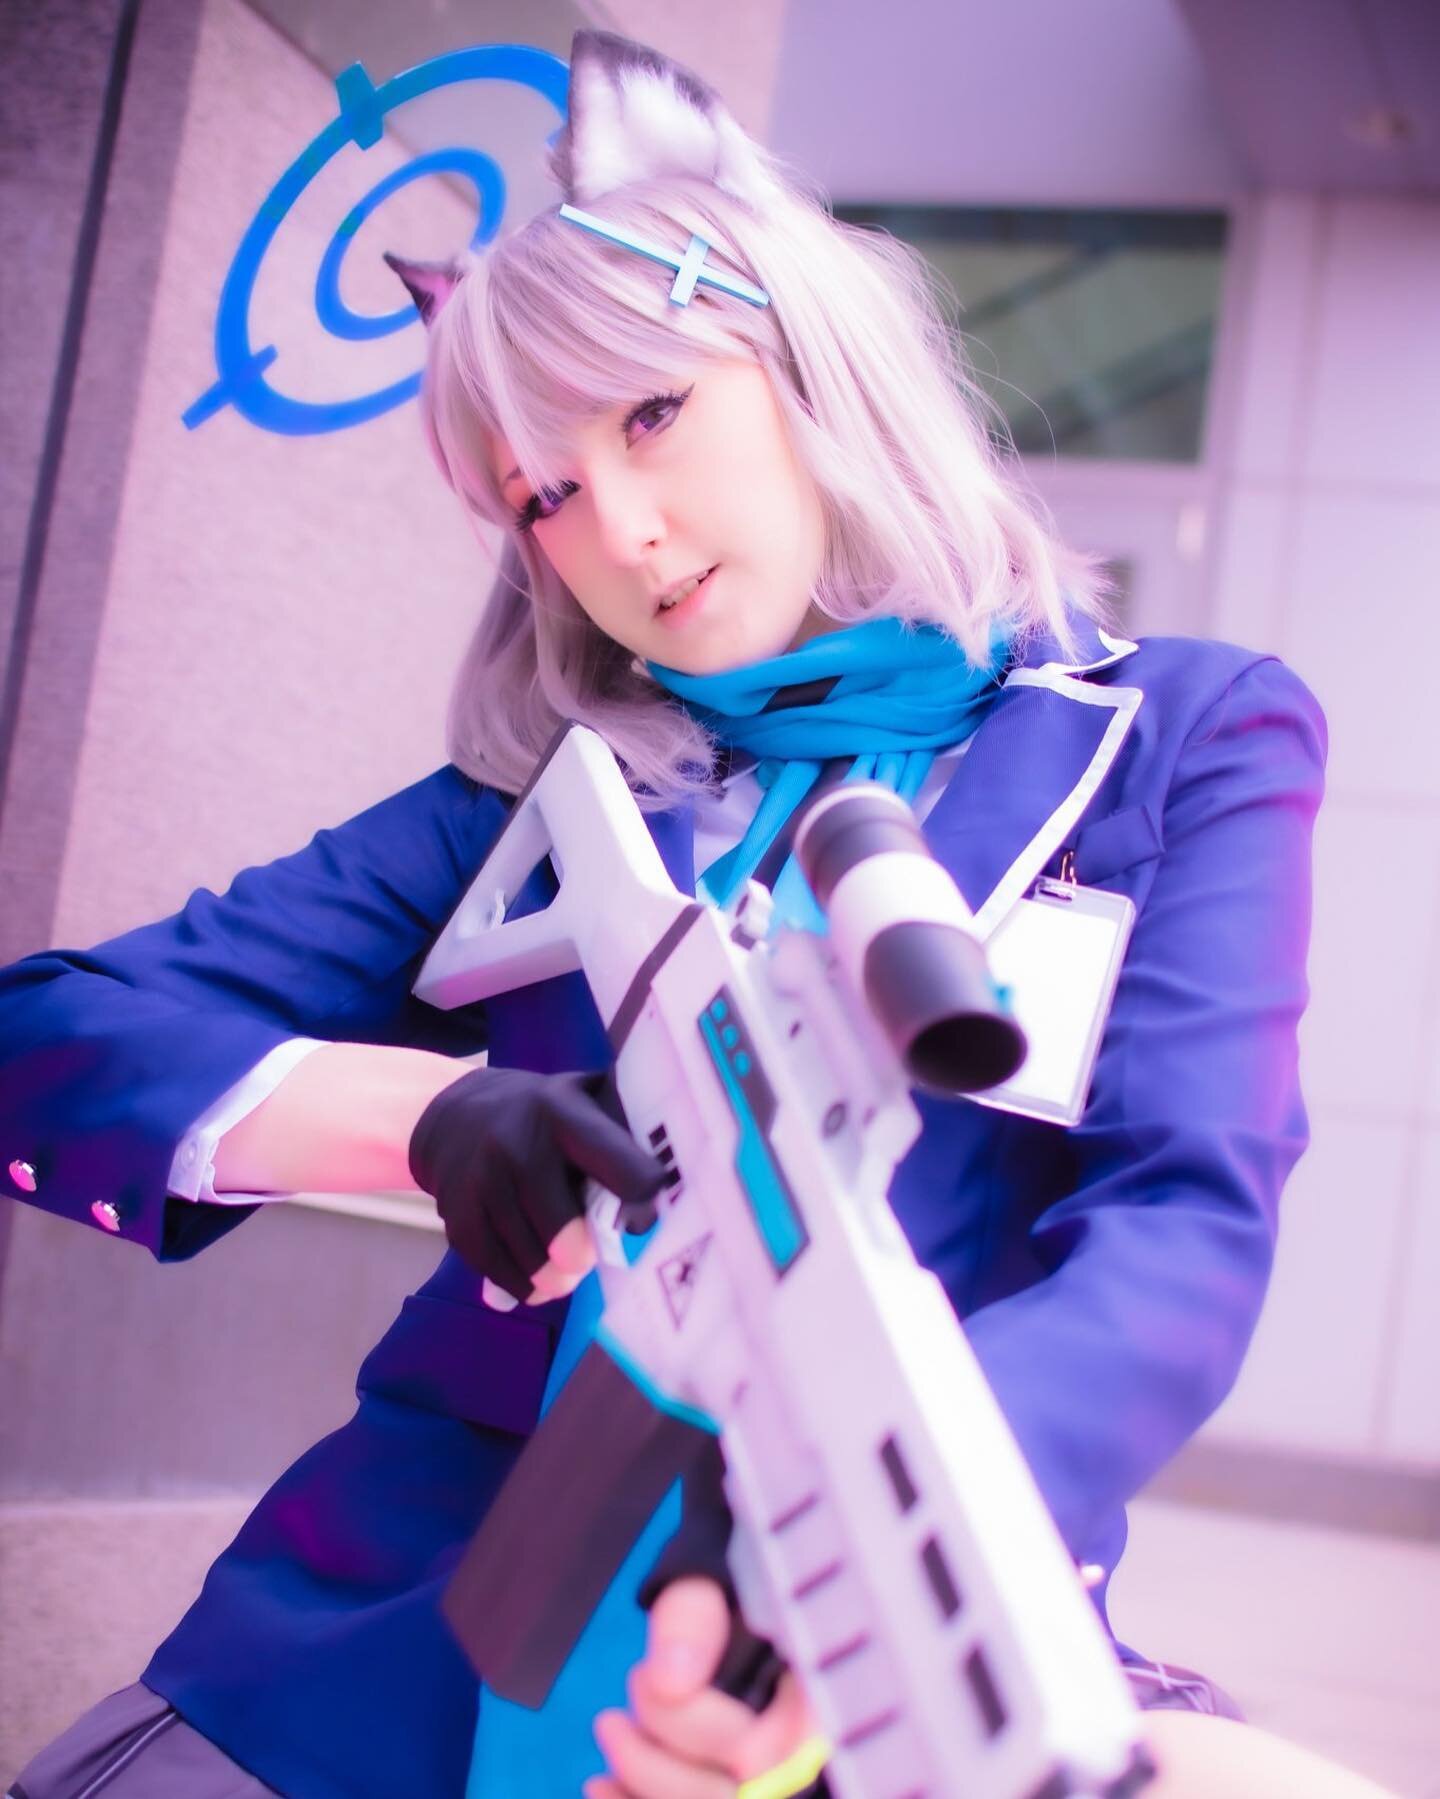 Shiroko from Blue Archive!
It&rsquo;s been about a year since I cosplayed Shiroko!  I am pretty excited for the Blue Archive anime coming out in April!
Been super considering cosplaying Blue Archive at Anime Expo (either going to do Shiroko or Bunny 